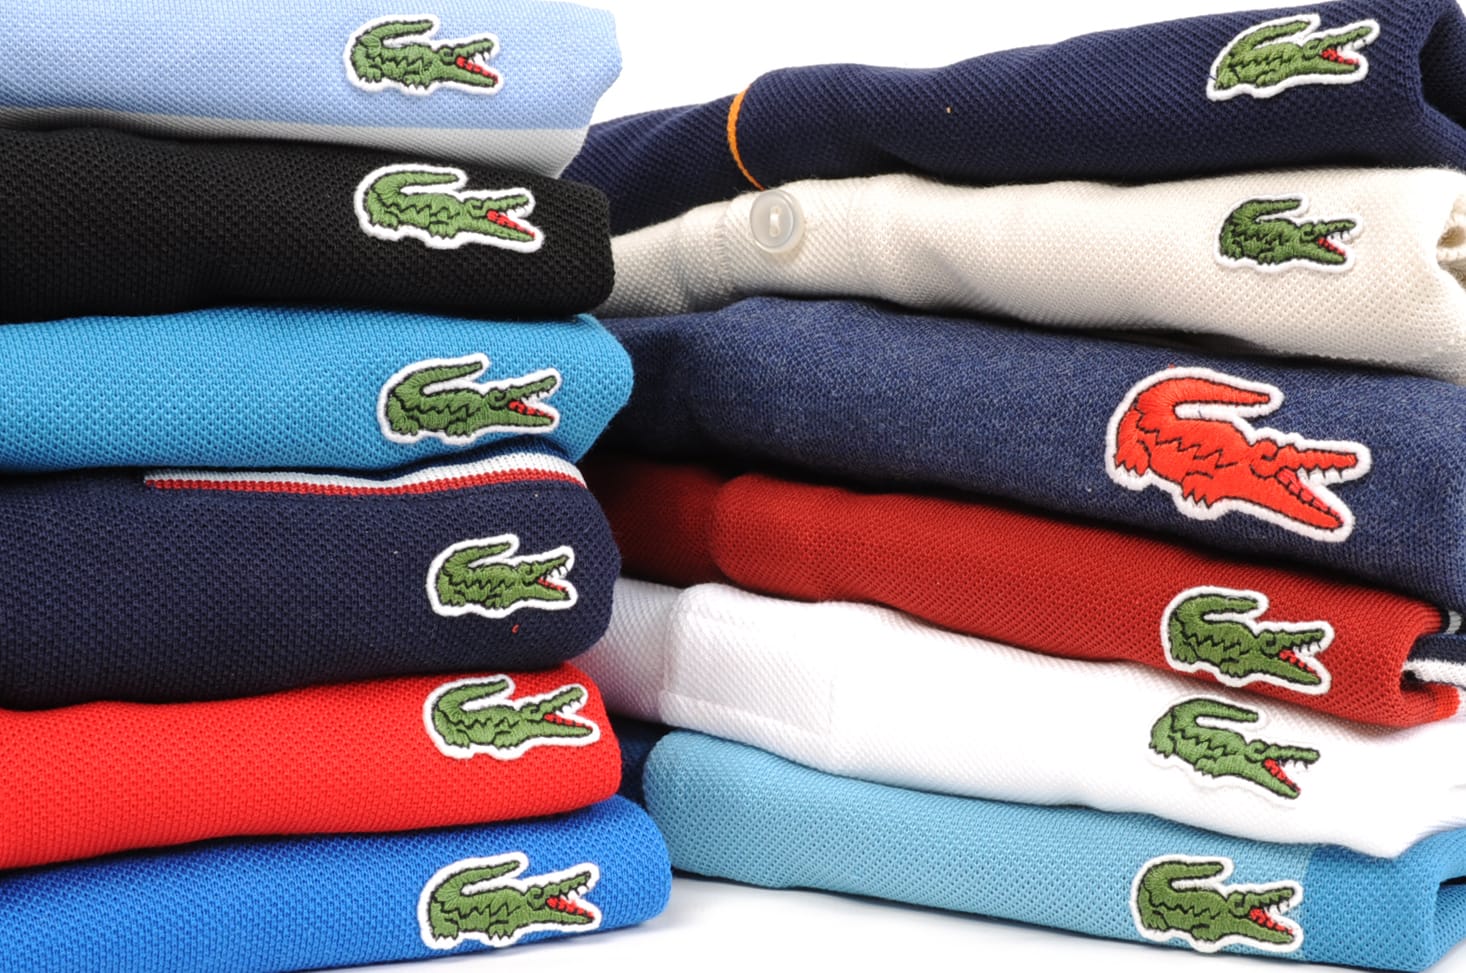 Lacoste trainers and polo sale | Buy into the history of an iconic brand